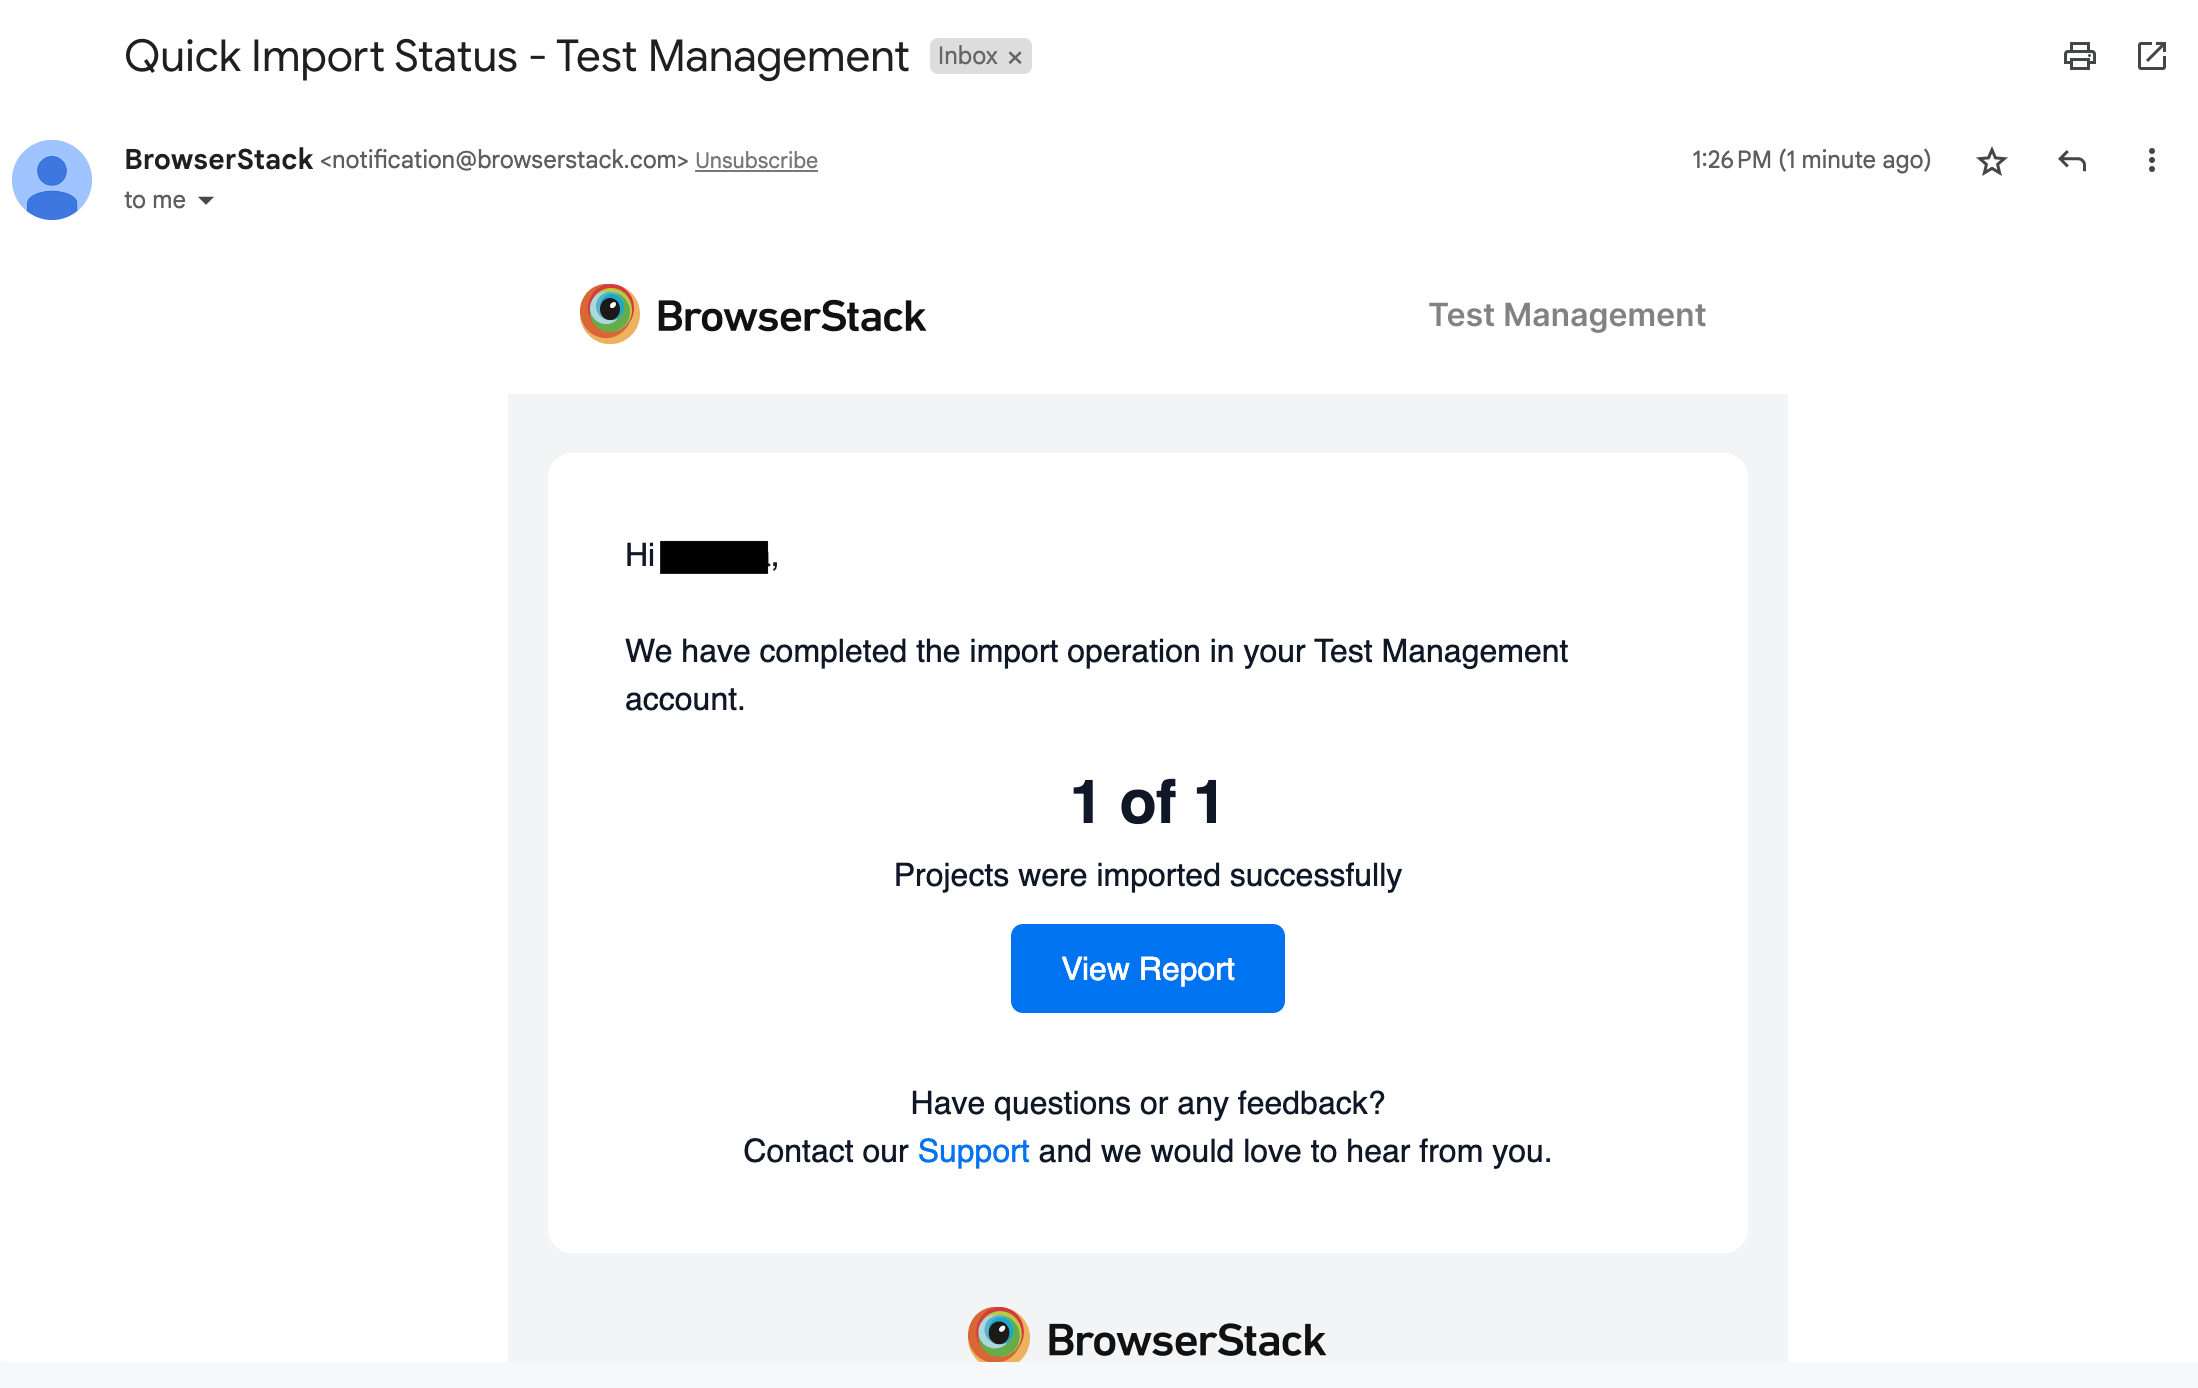 Quick import email notification